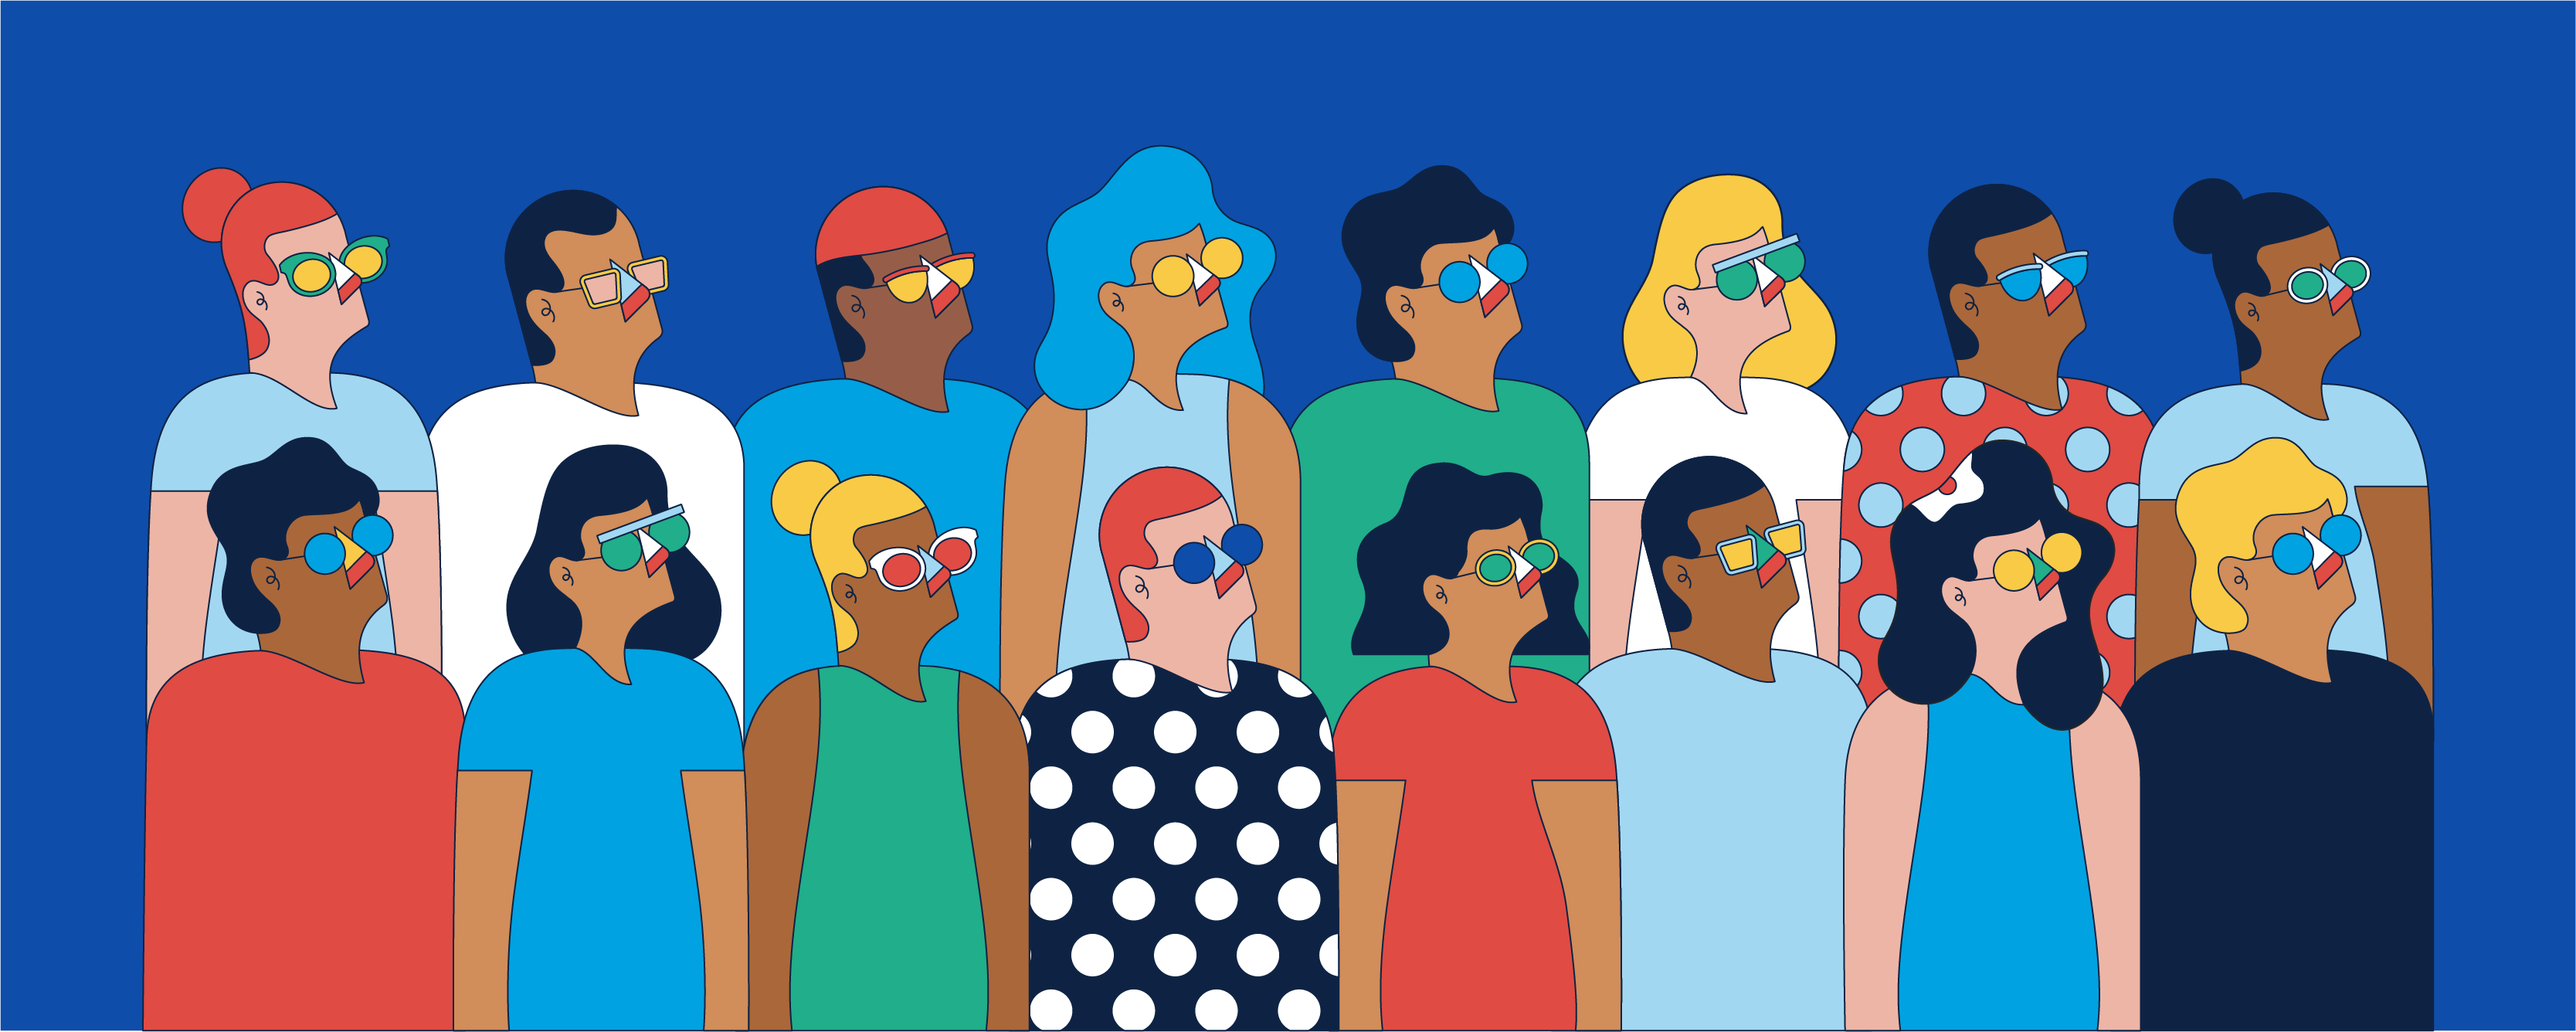 Cartoon From Warby Parker with people wearing glasses